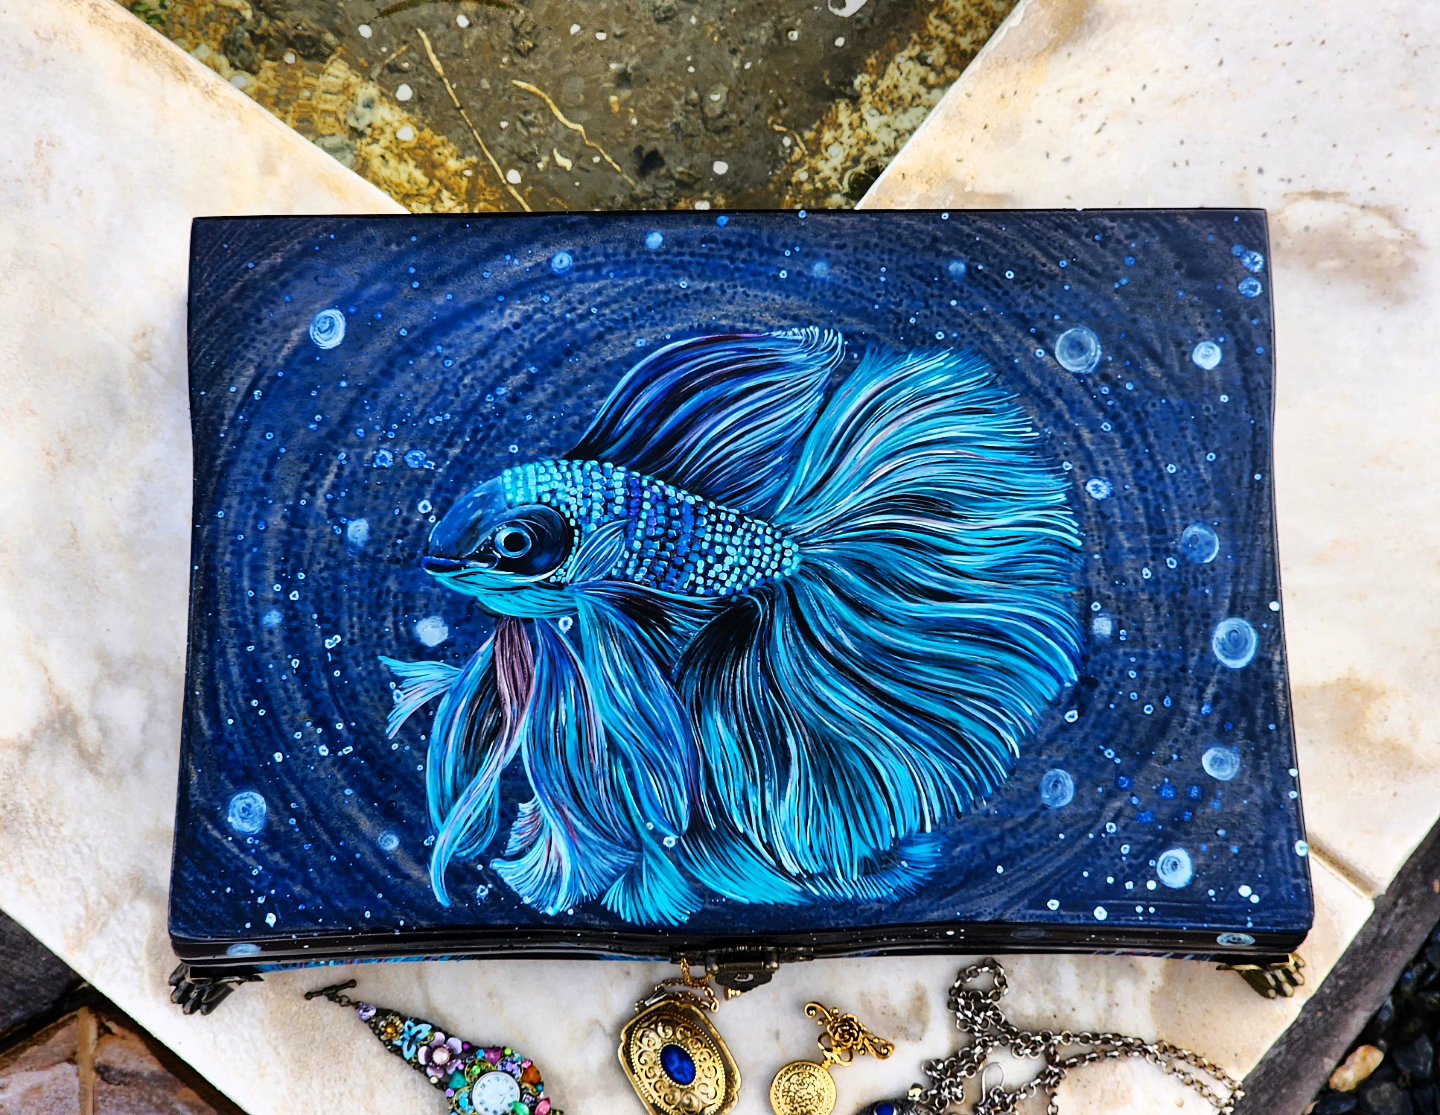 Handpainted Antique Wooden Jewelry Box with an original design of a betta fish. Metal feet and handle included.